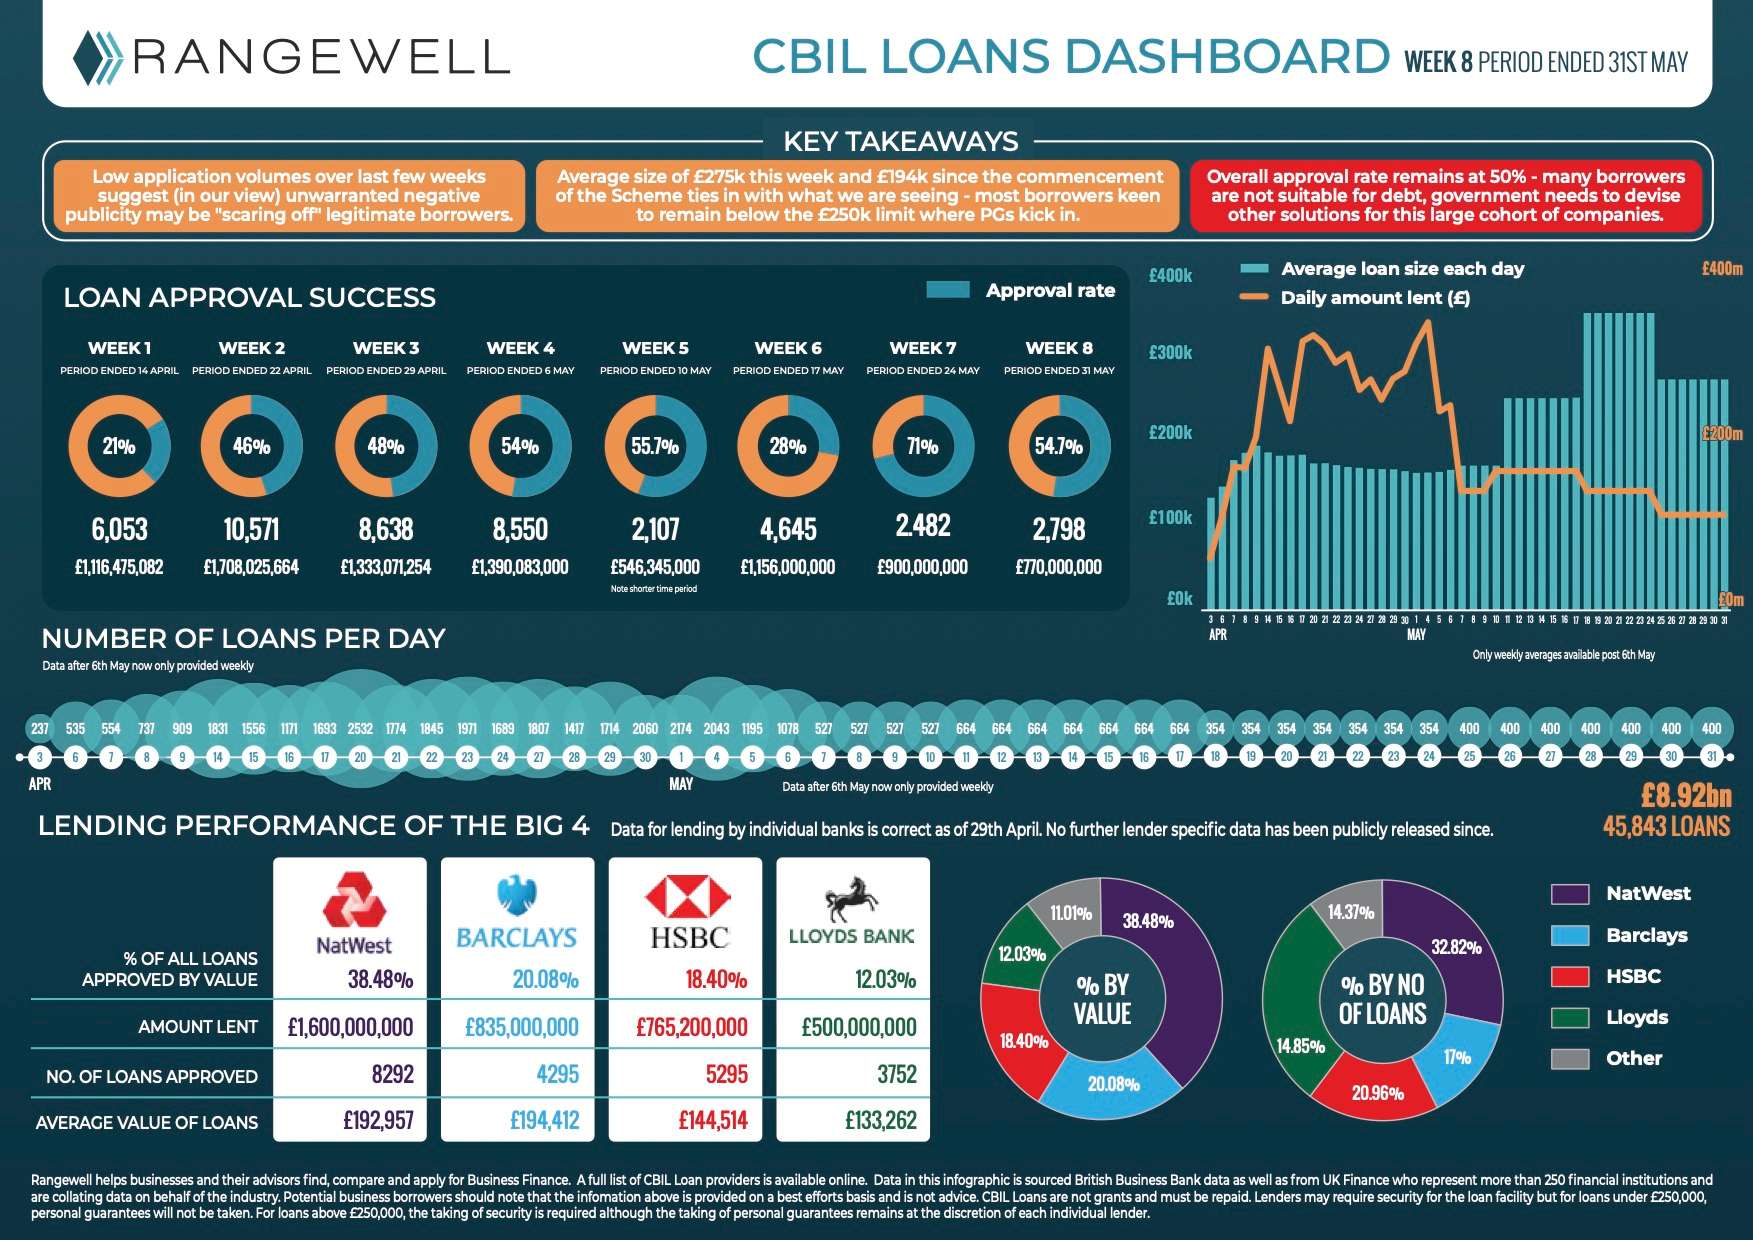 CBILS and Bounce Back Loans Dashboards Week 8